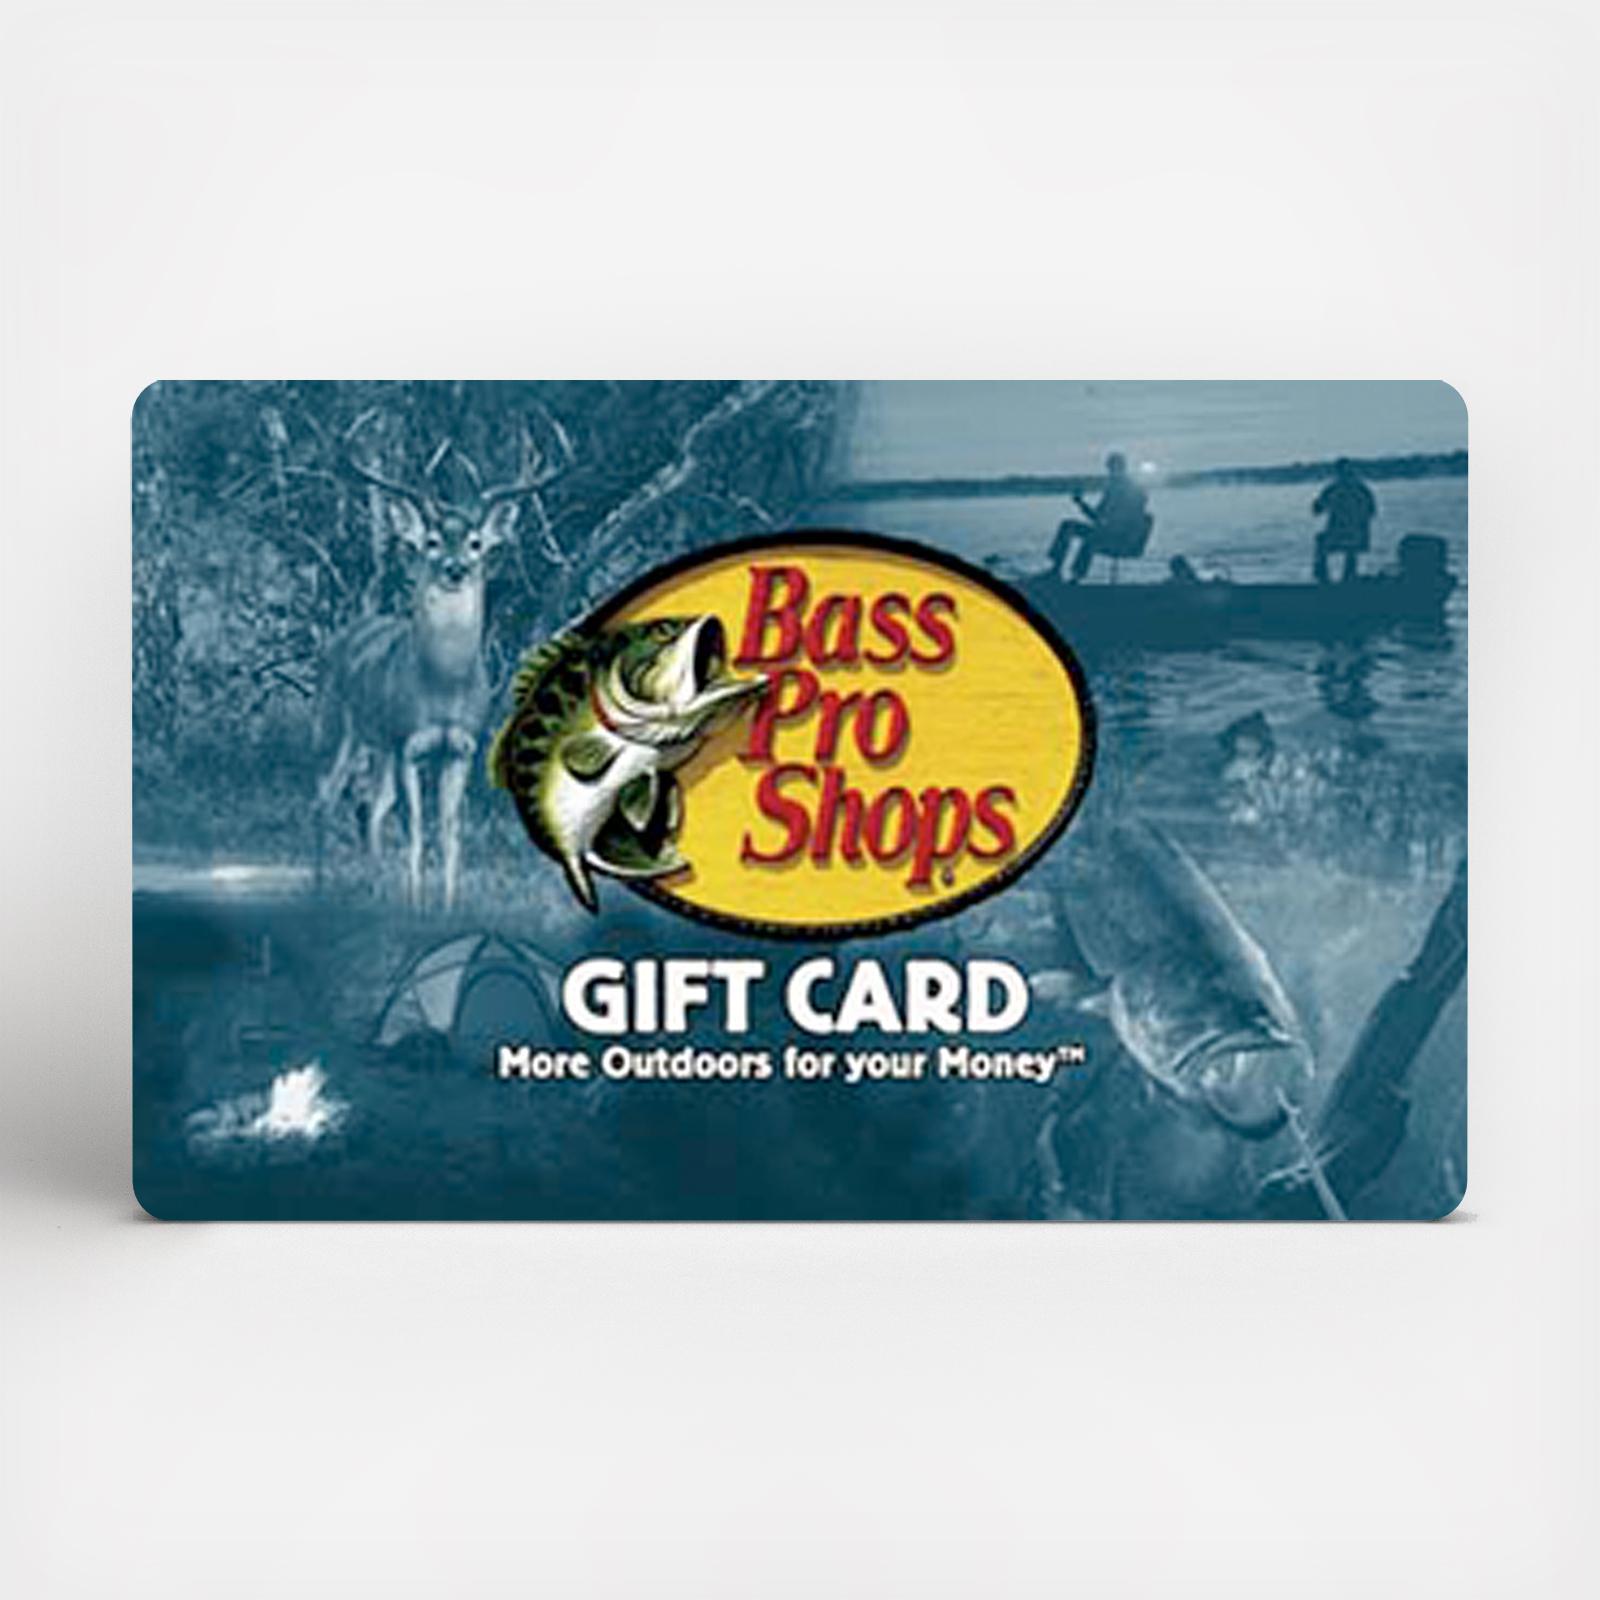  Bass Pro Shops Gift Card : Gift Cards